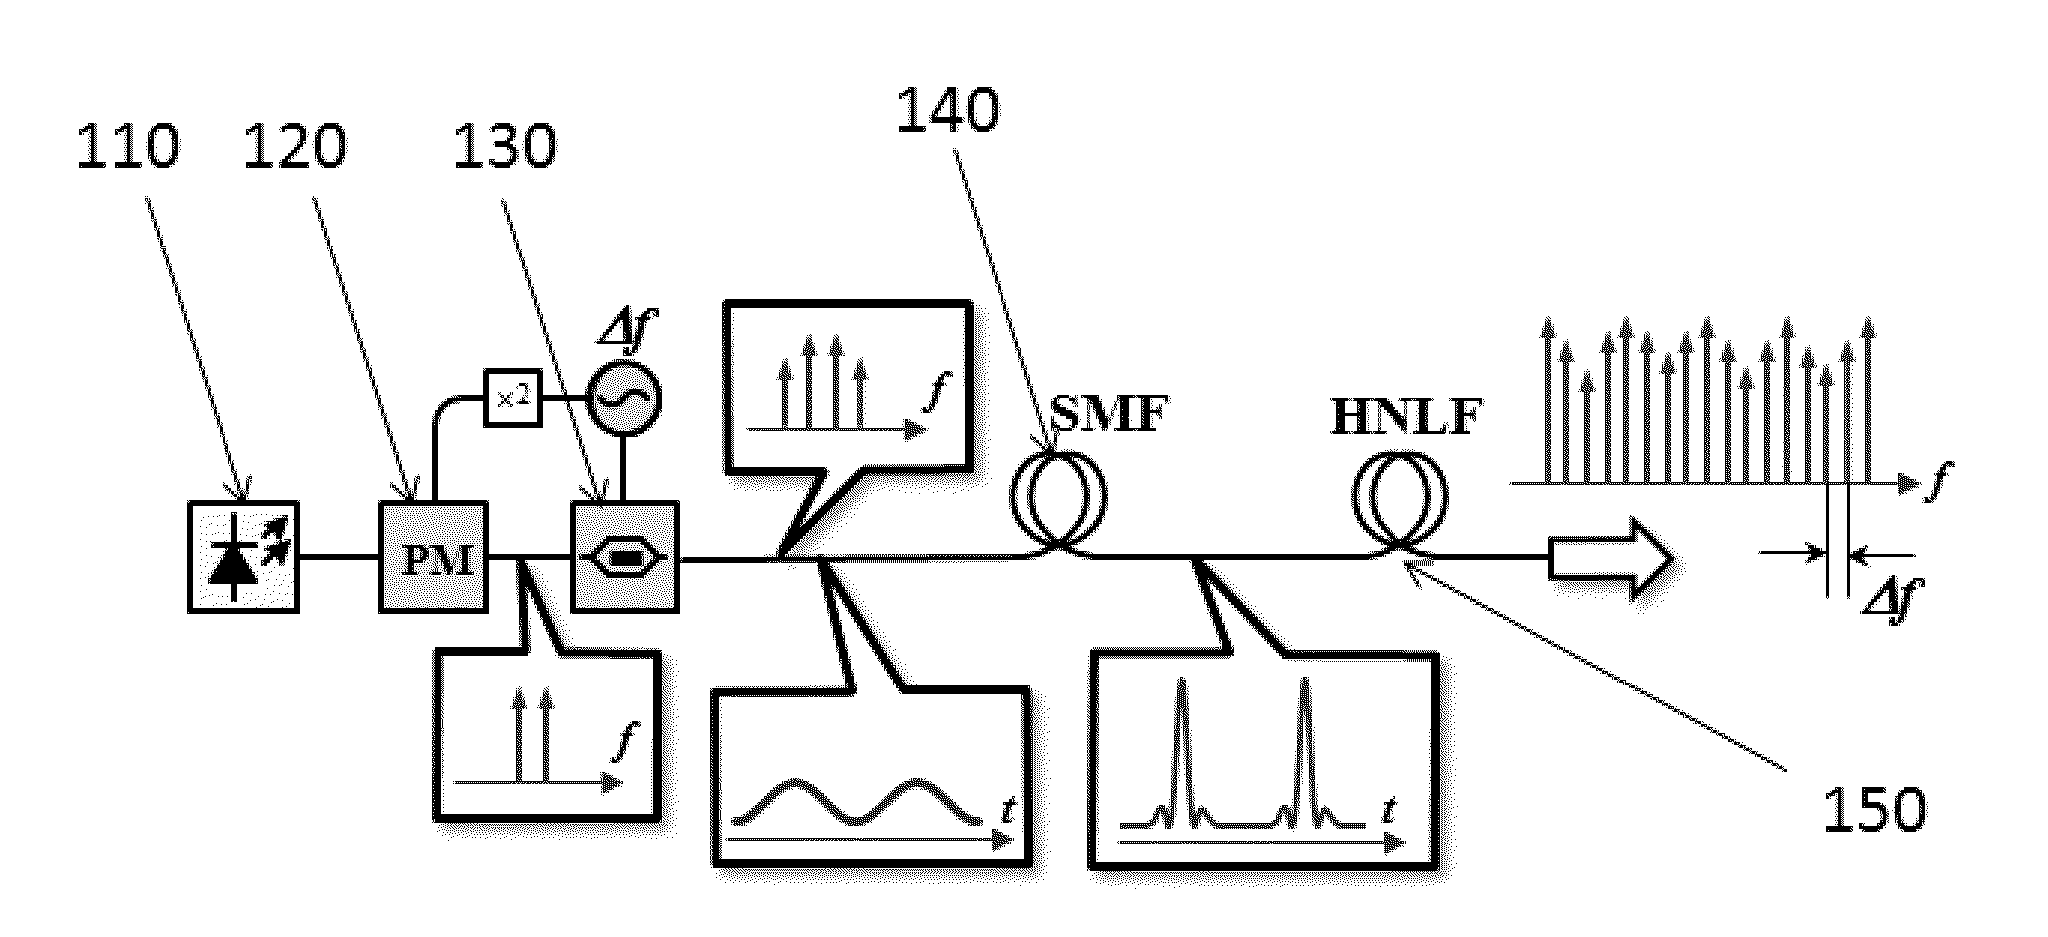 Method for wideband spectrally equalized frequency comb generation